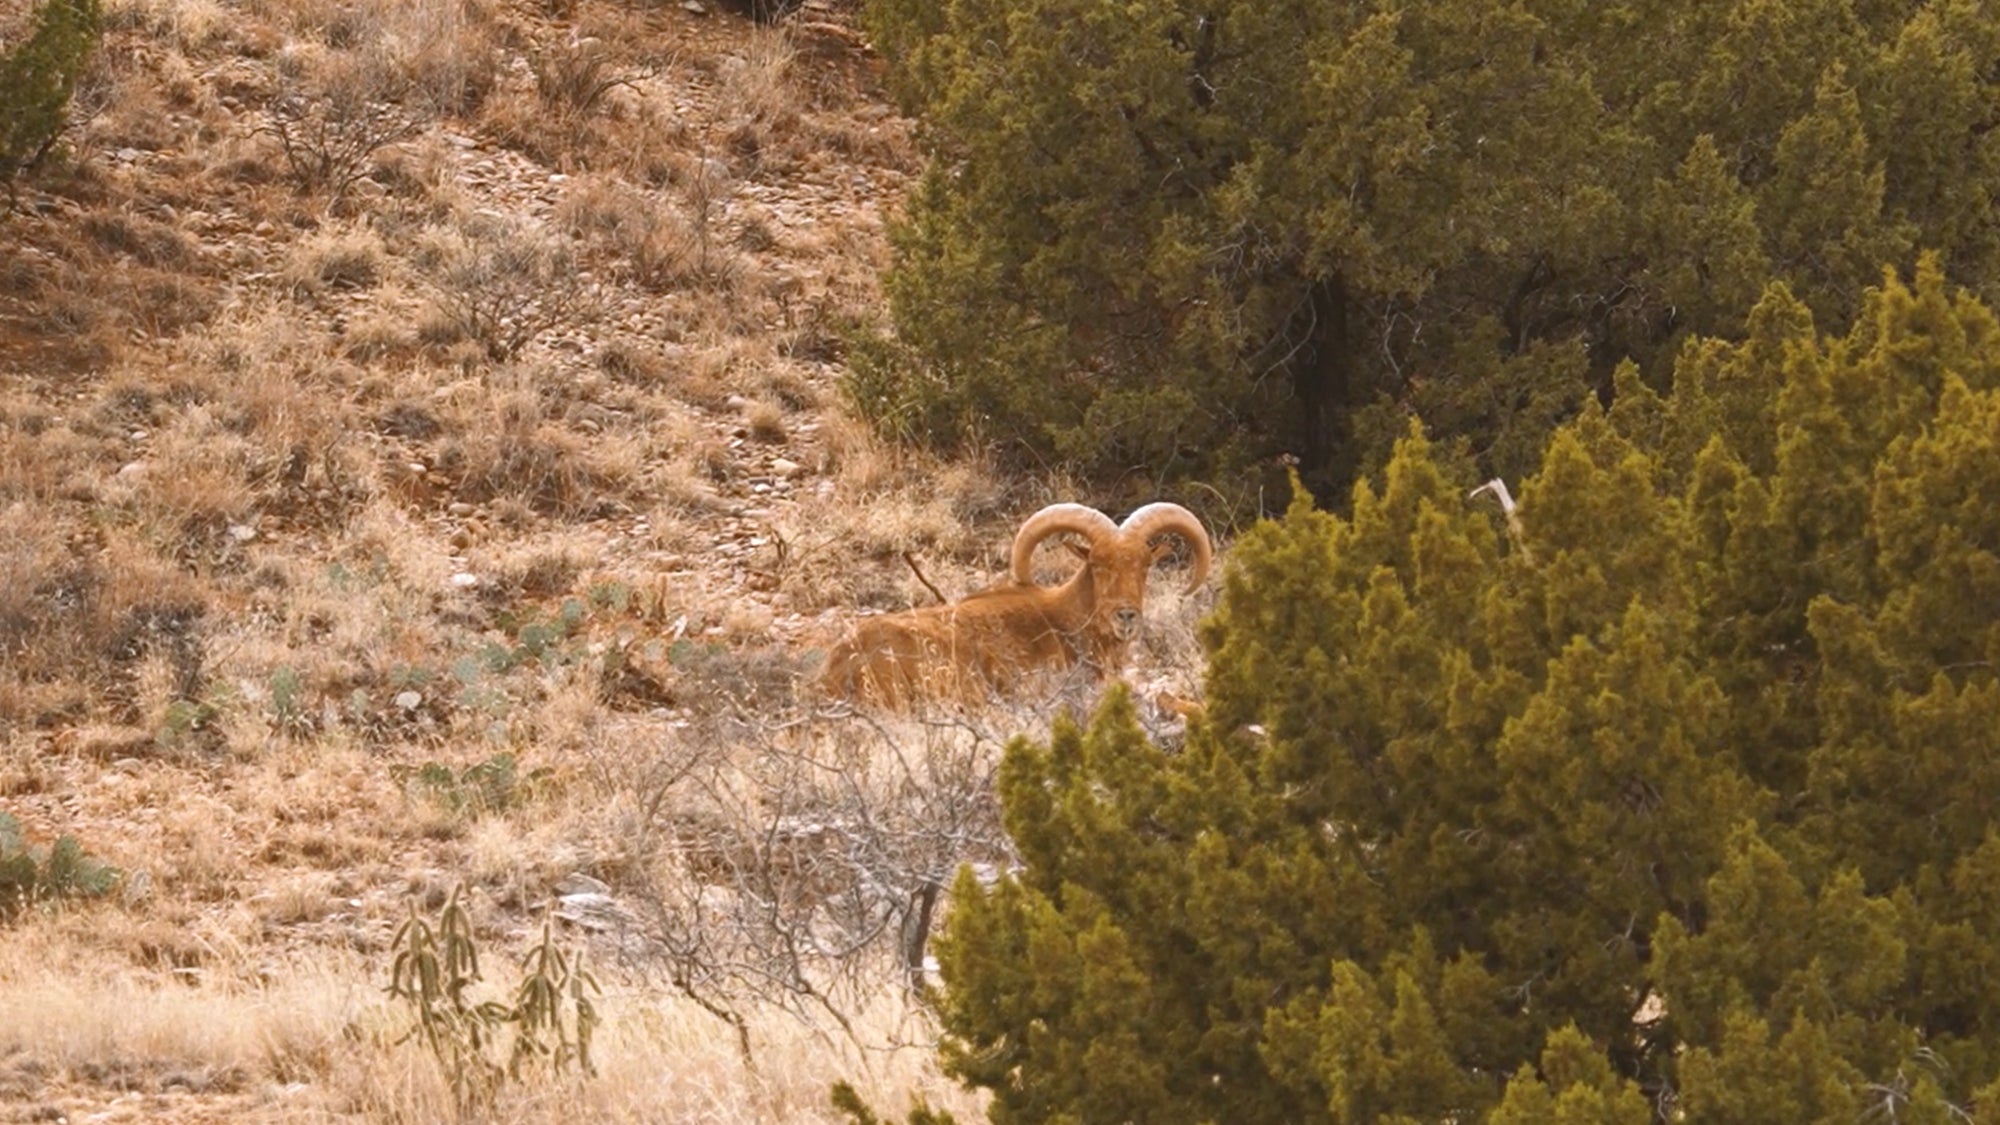 photo of aoudad in west Texas